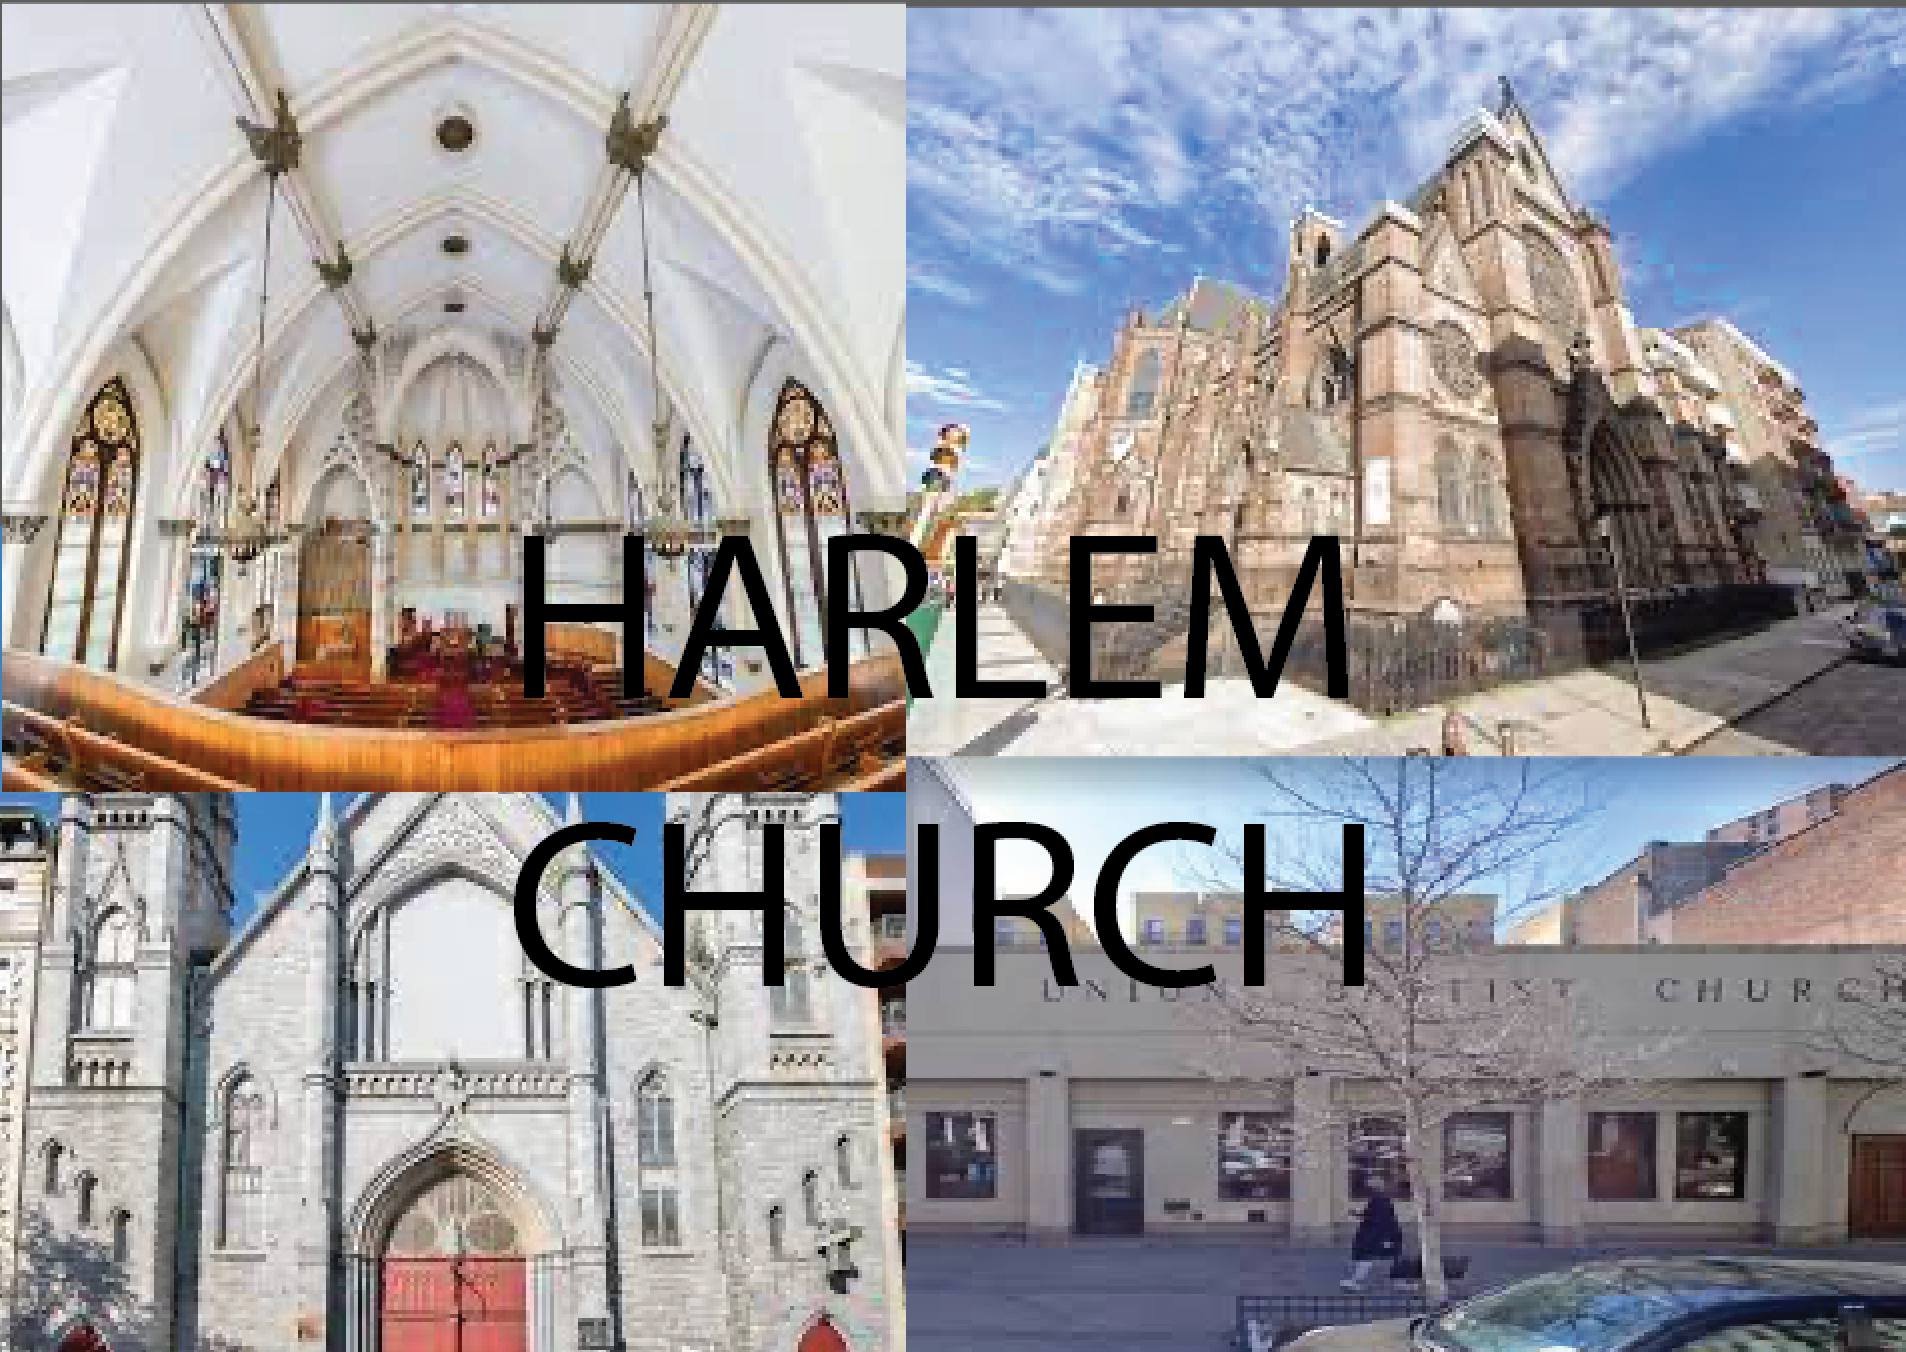 Harlem Gospel is a musical genre that has its roots in the African American community of Harlem